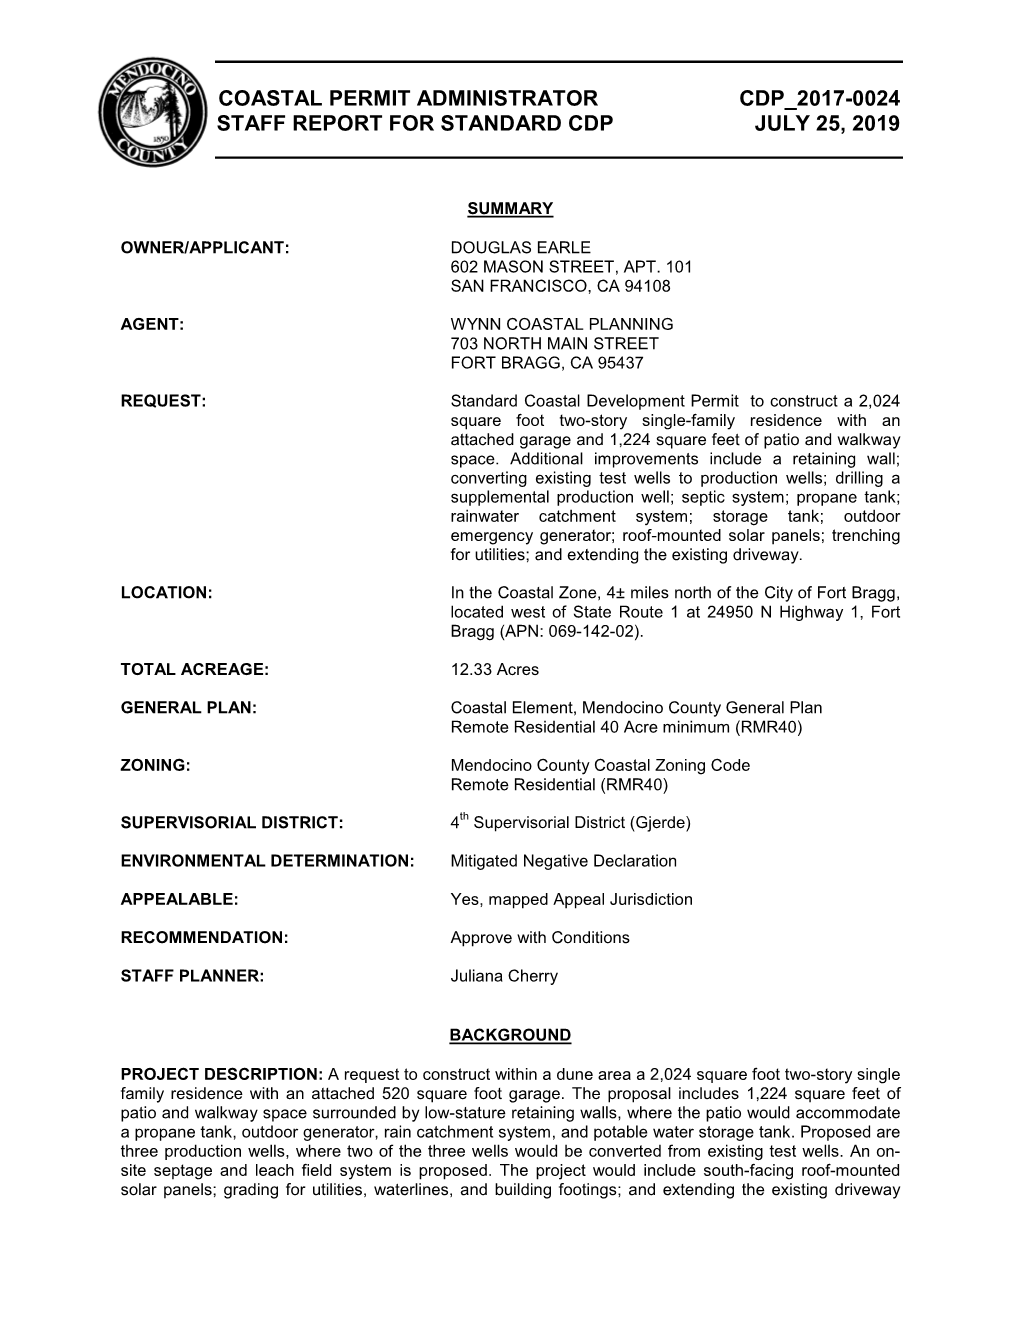 Coastal Permit Administrator Cdp 2017-0024 Staff Report for Standard Cdp July 25, 2019